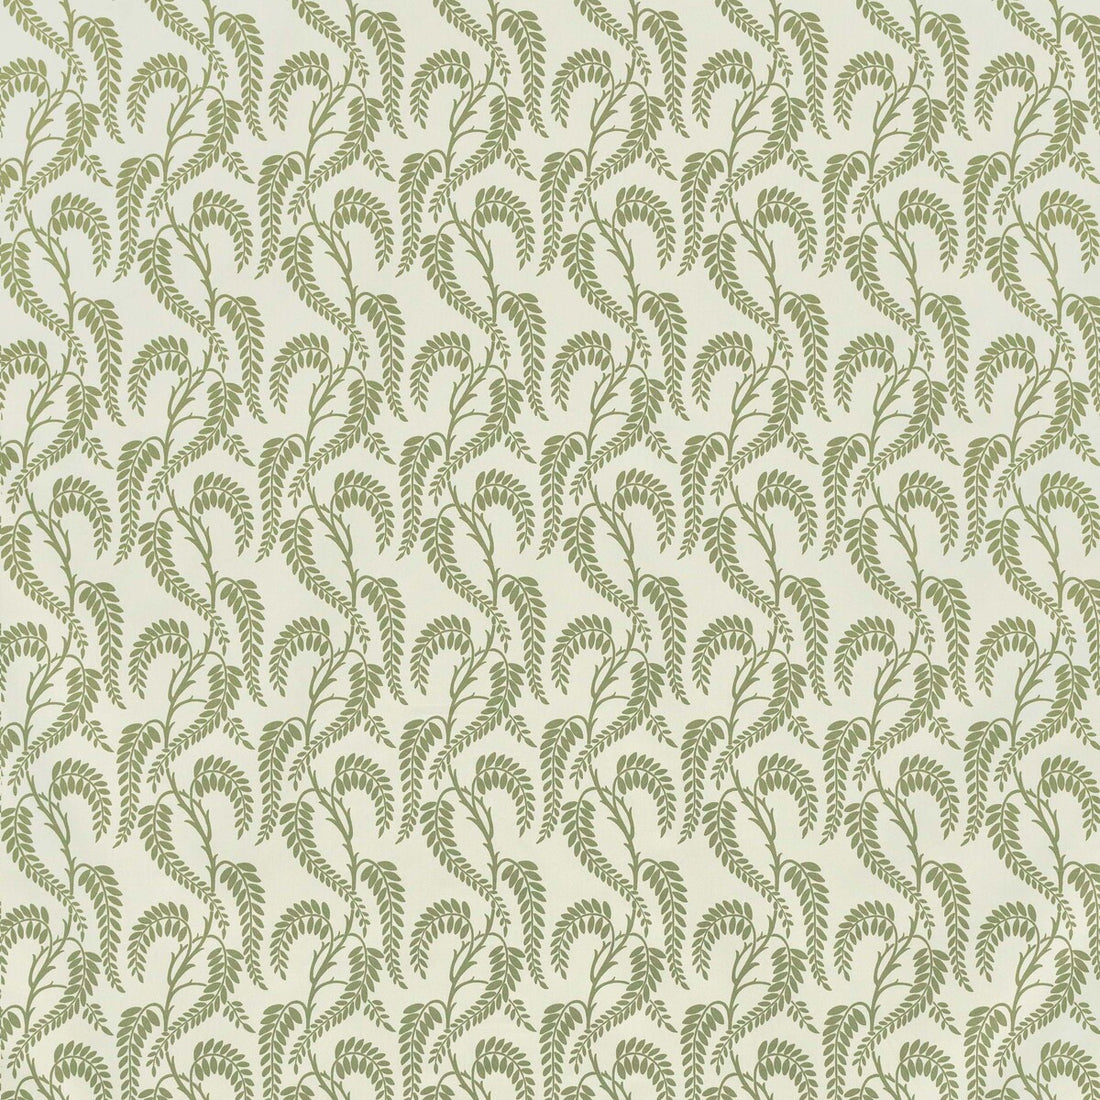 Wisteria fabric in sage on white color - pattern 2023134.31.0 - by Lee Jofa in the Paolo Moschino Garden II collection